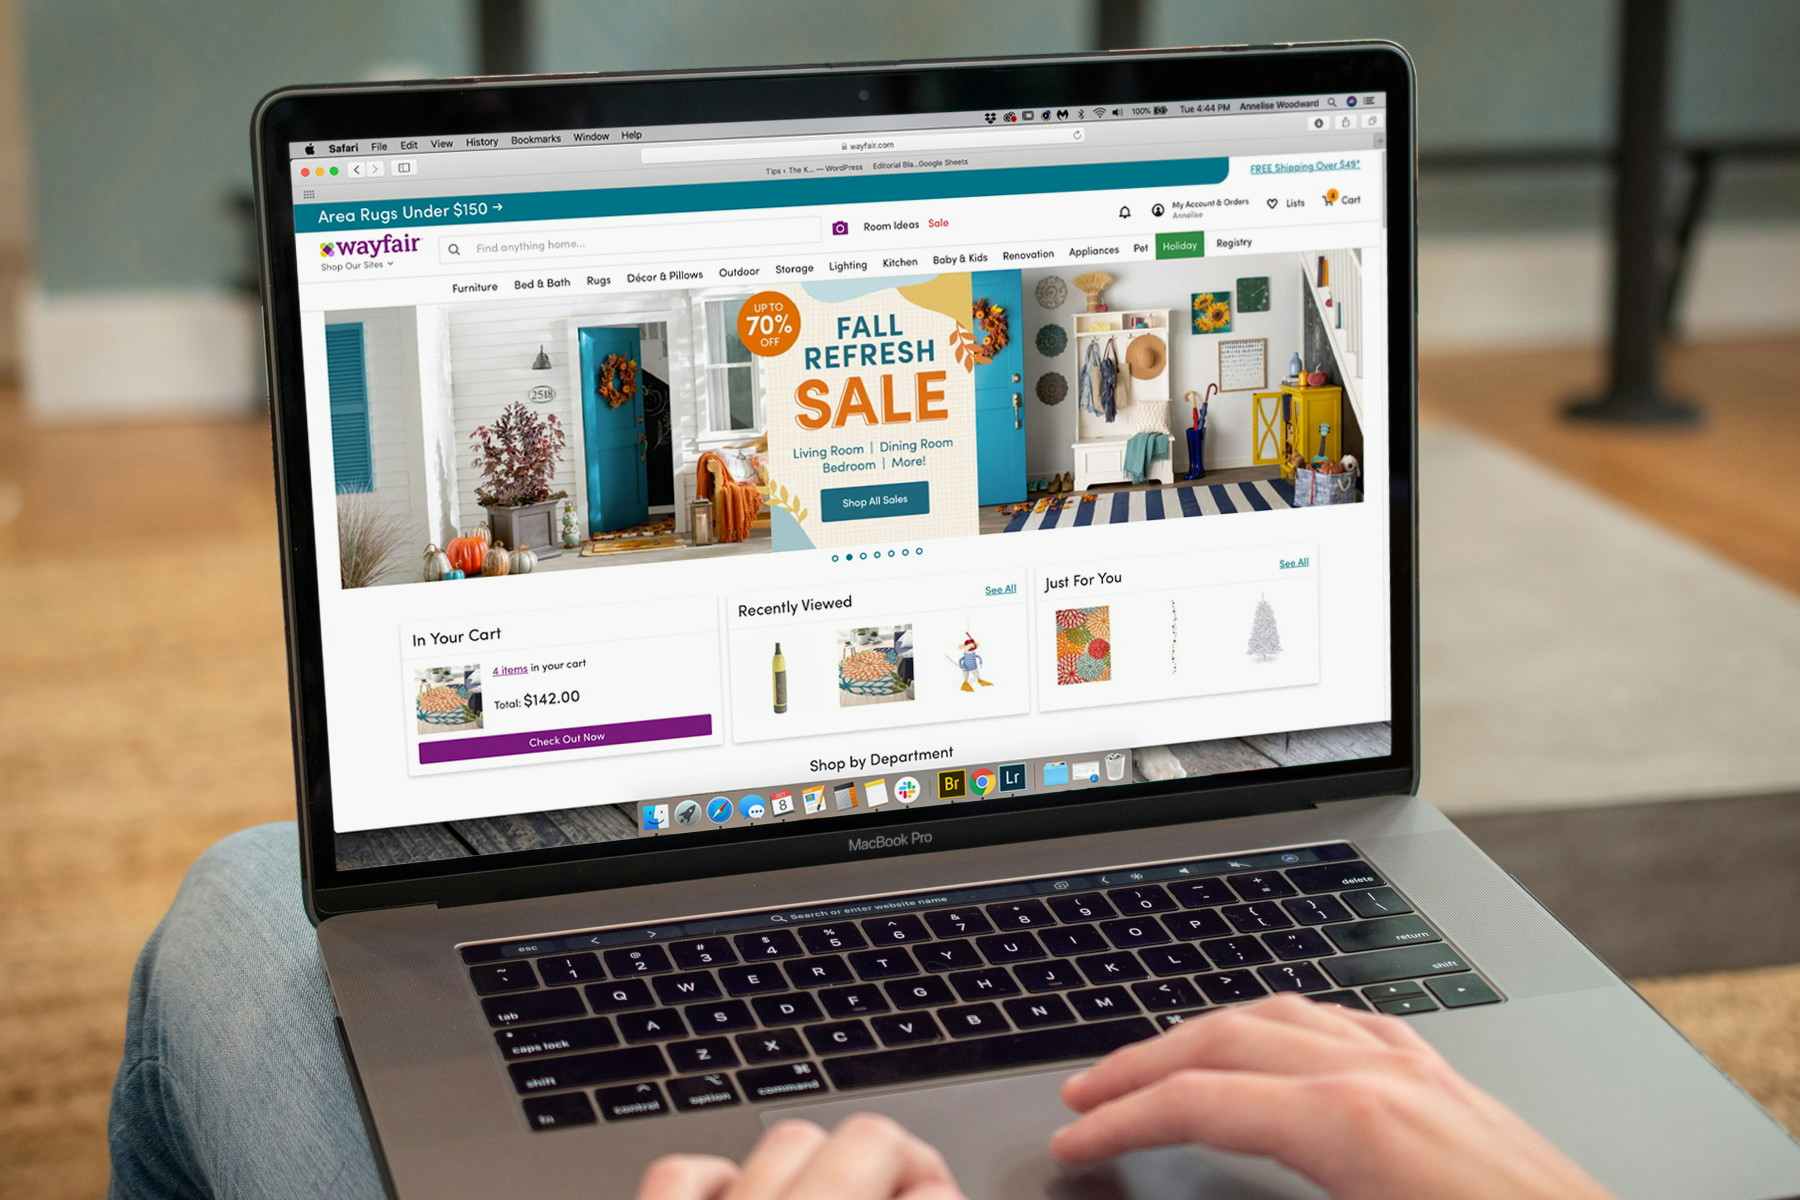 Don't buy anything on Wayfair unless it's on sale.